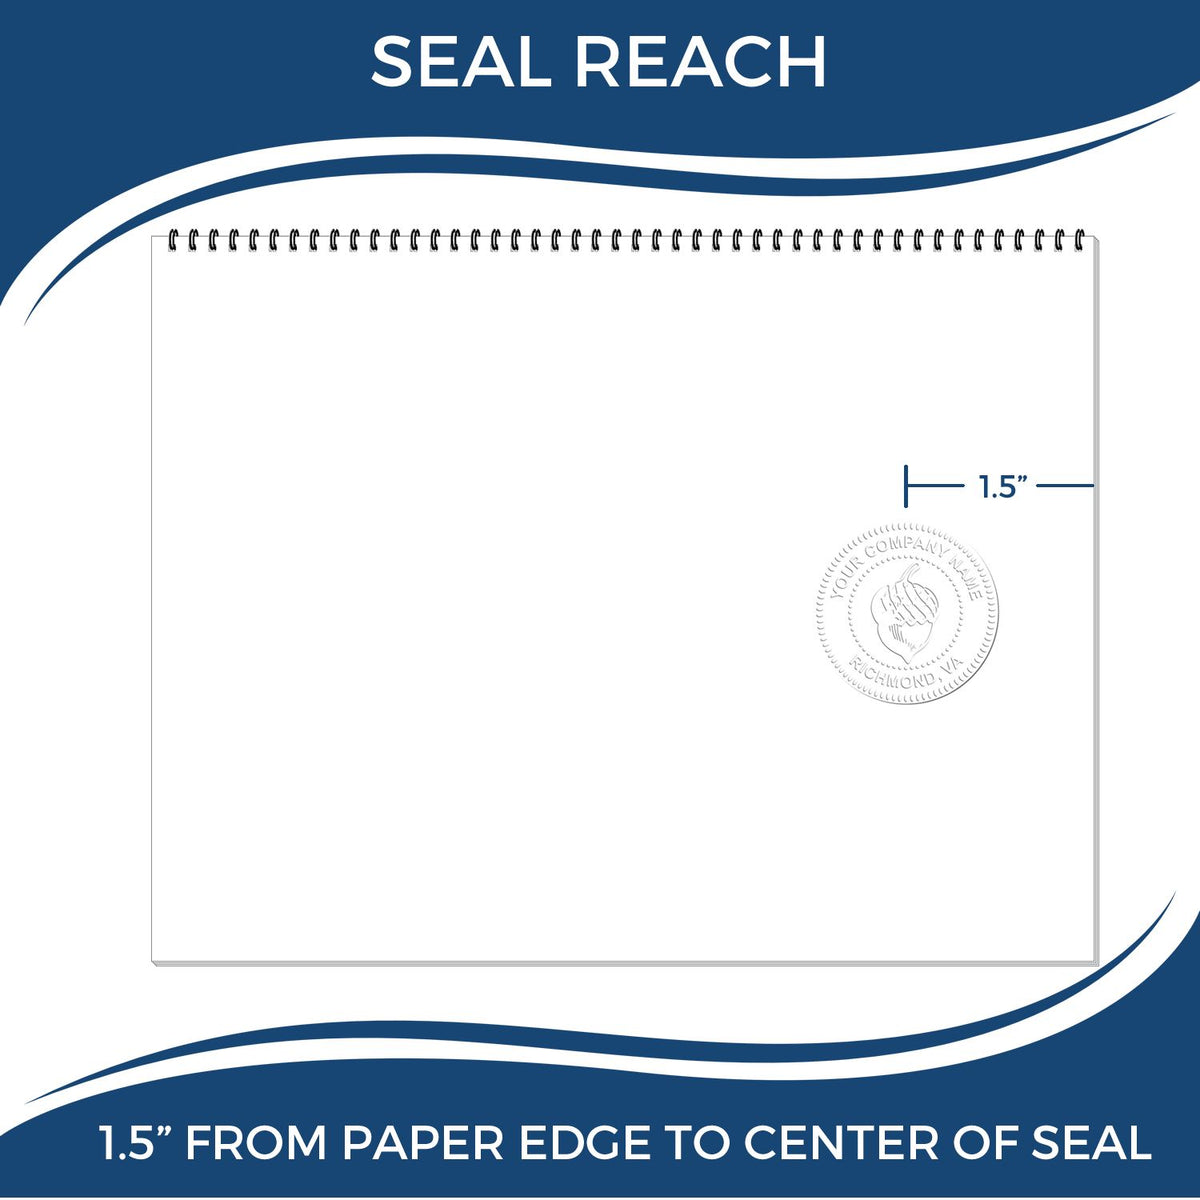 An infographic showing the seal reach which is represented by a ruler and a miniature seal image of the Wyoming Geologist Desk Seal